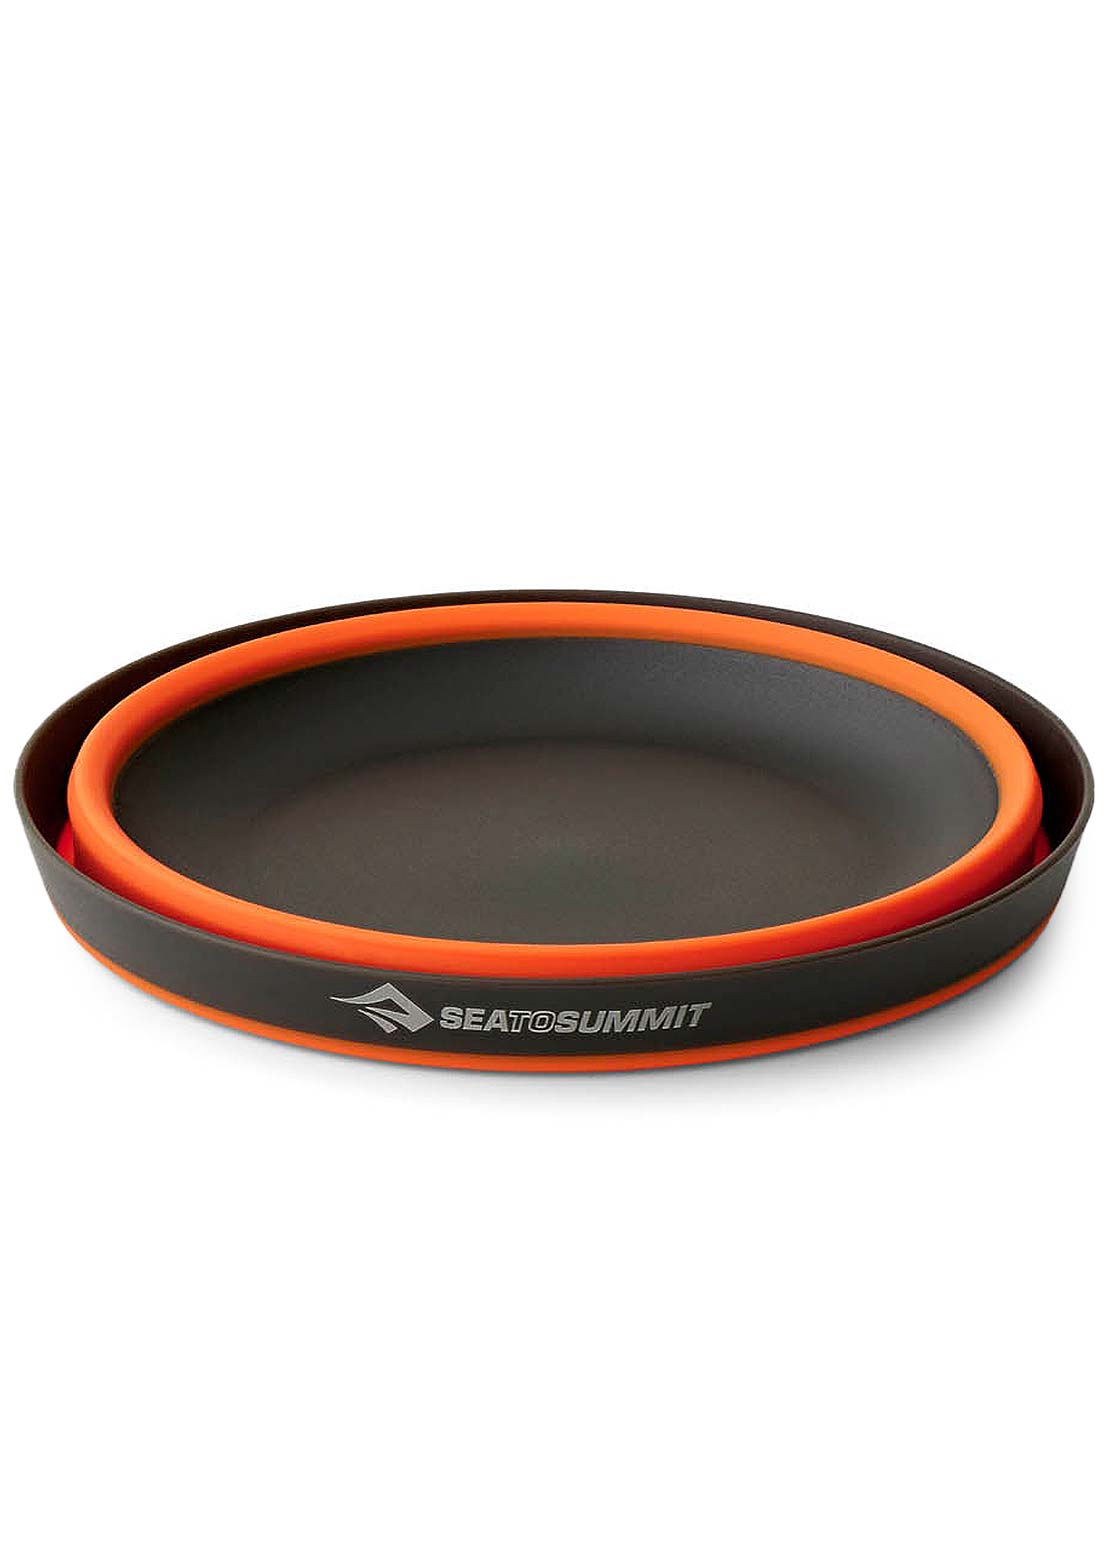 Sea To Summit Frontier UL Collapsible Bowl PuffinsBill Orange